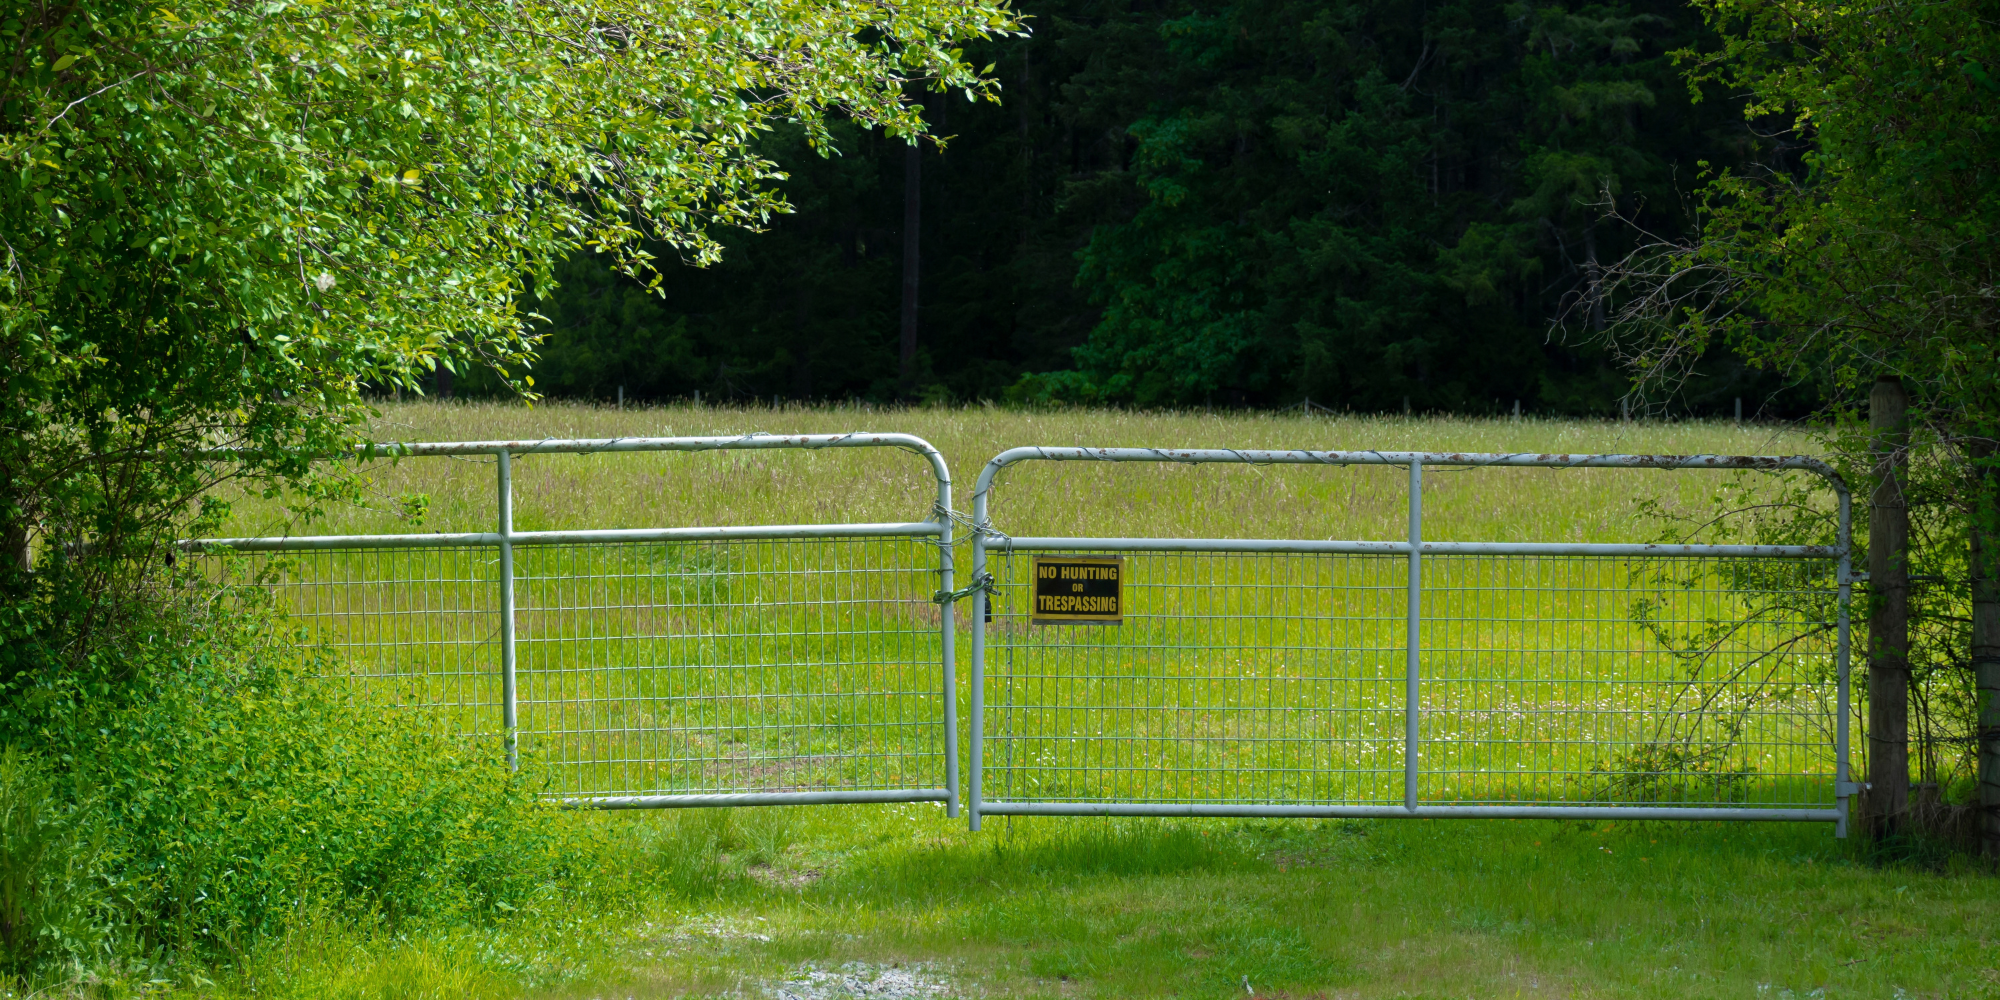 A metal gate blocks an entrance to a grassy field, with a 